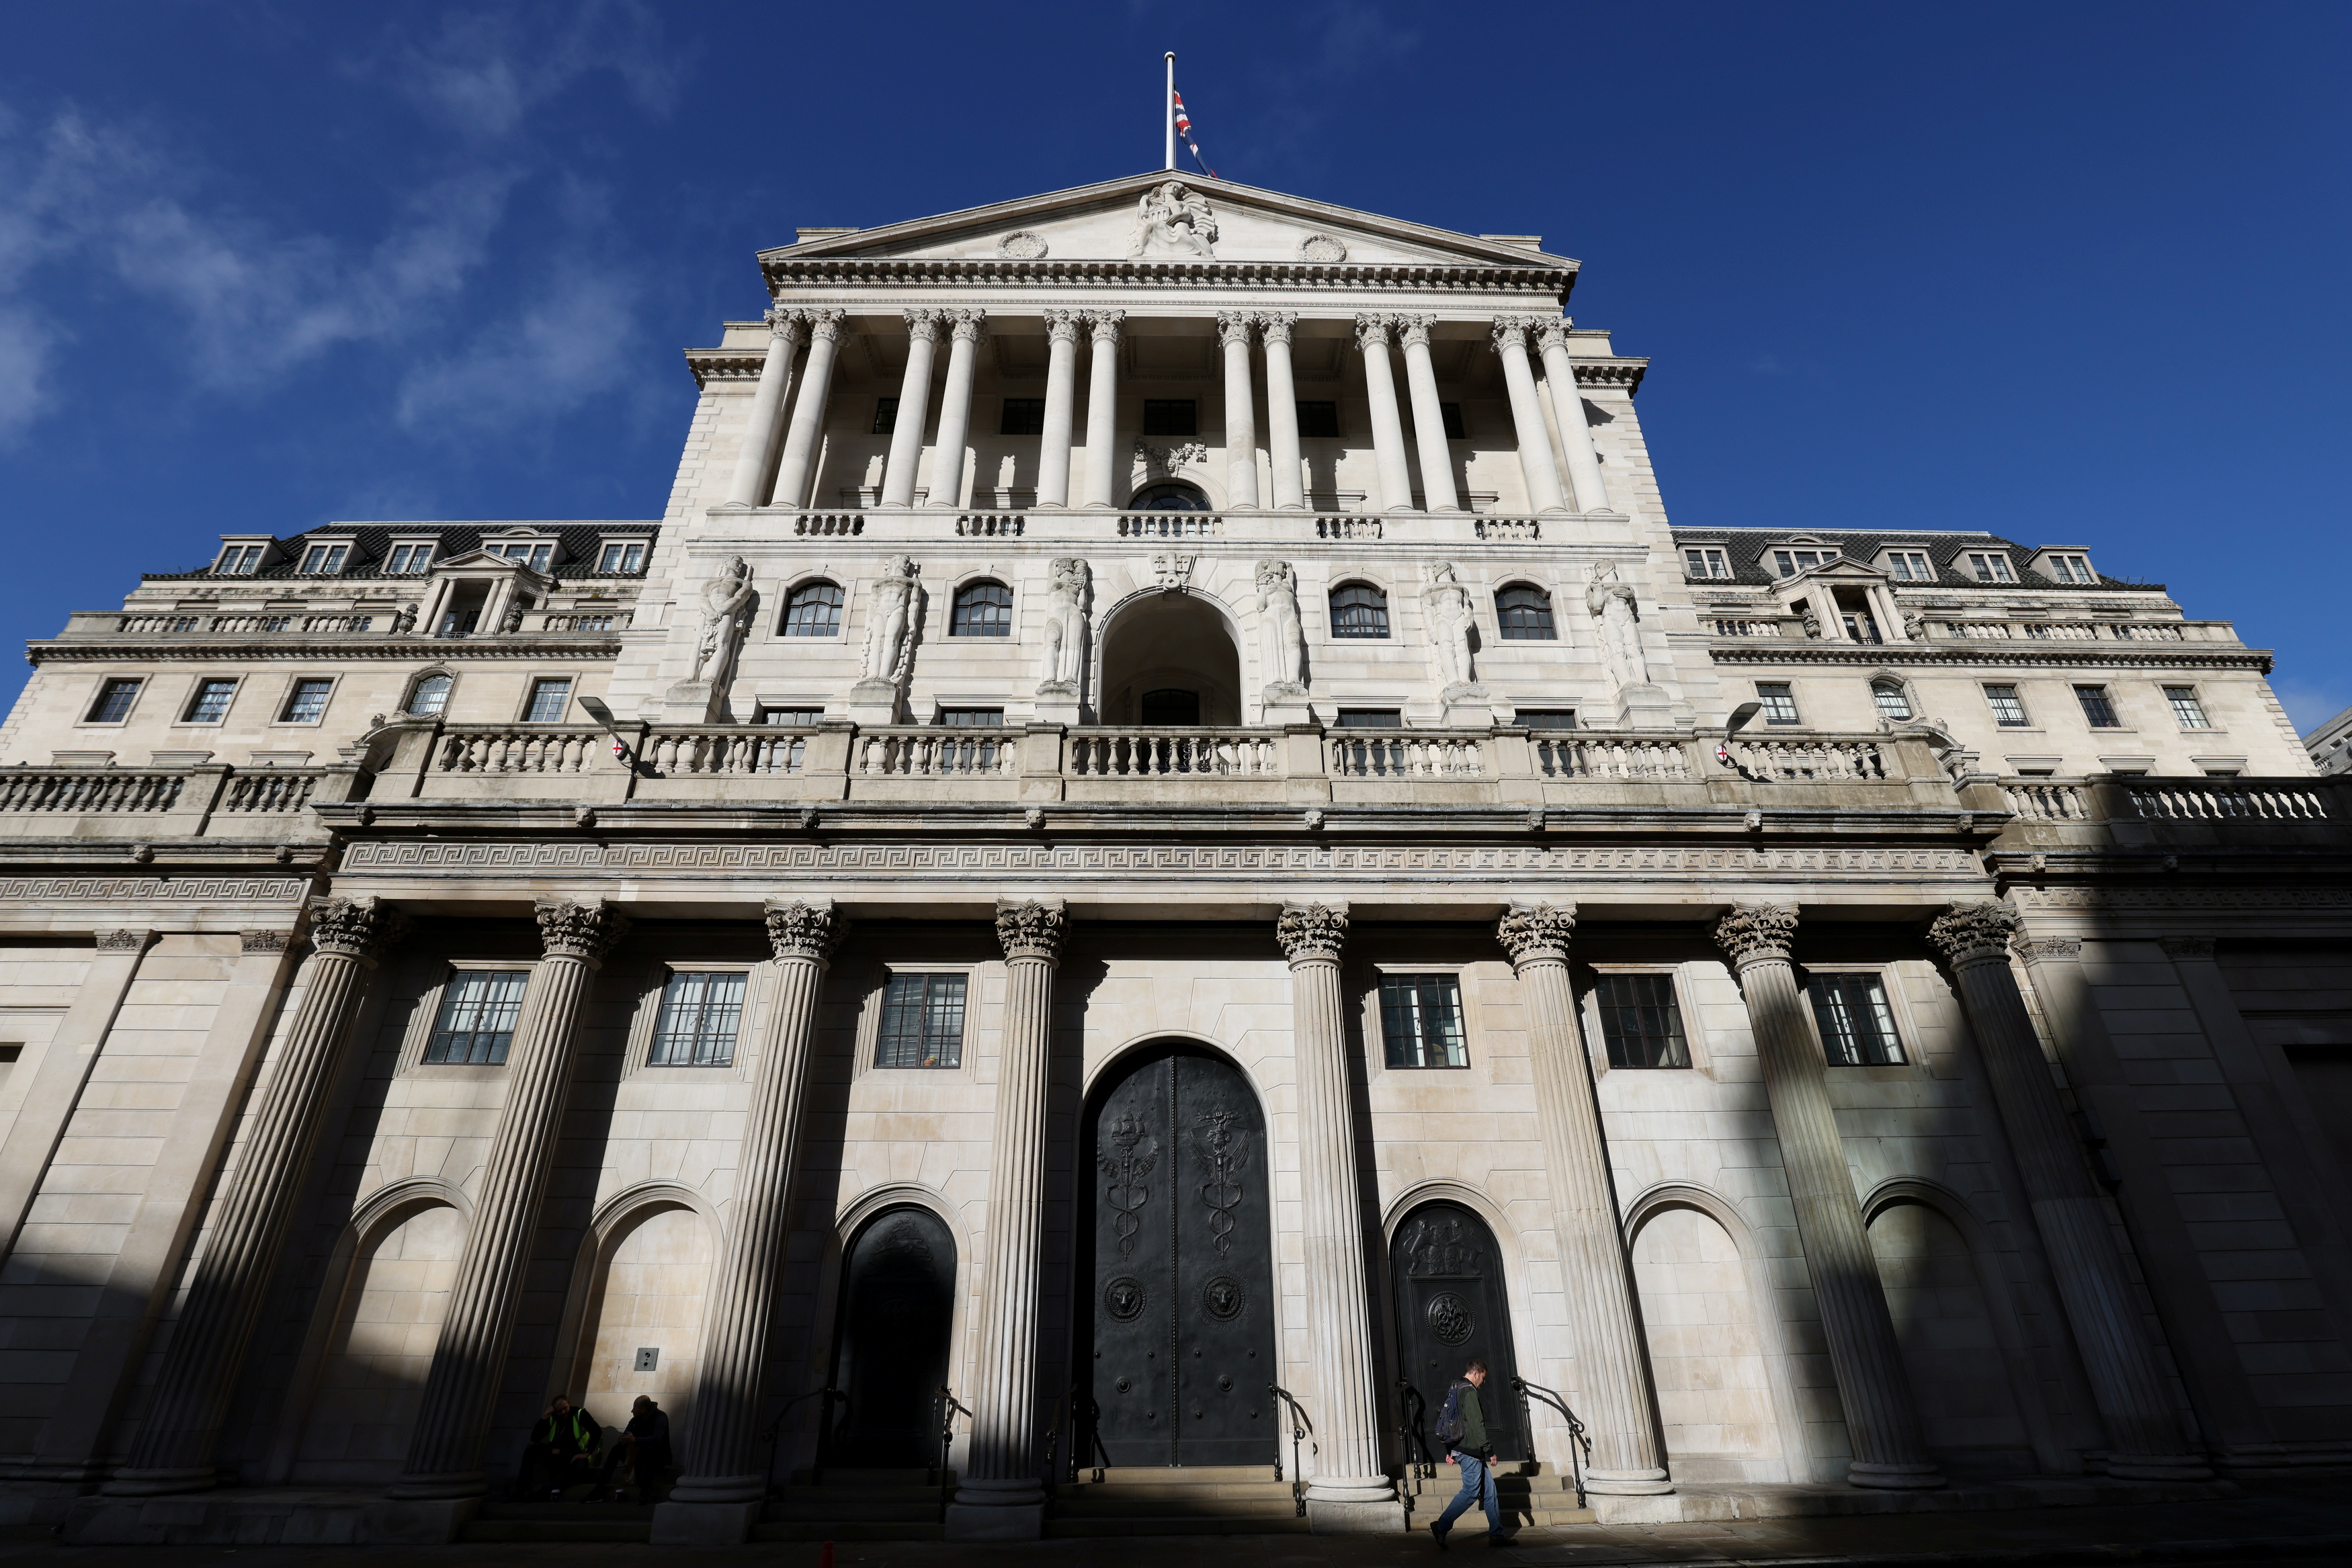 A person walks past the Bank of England, in London, Britain October 31, 2021. REUTERS/Tom Nicholson